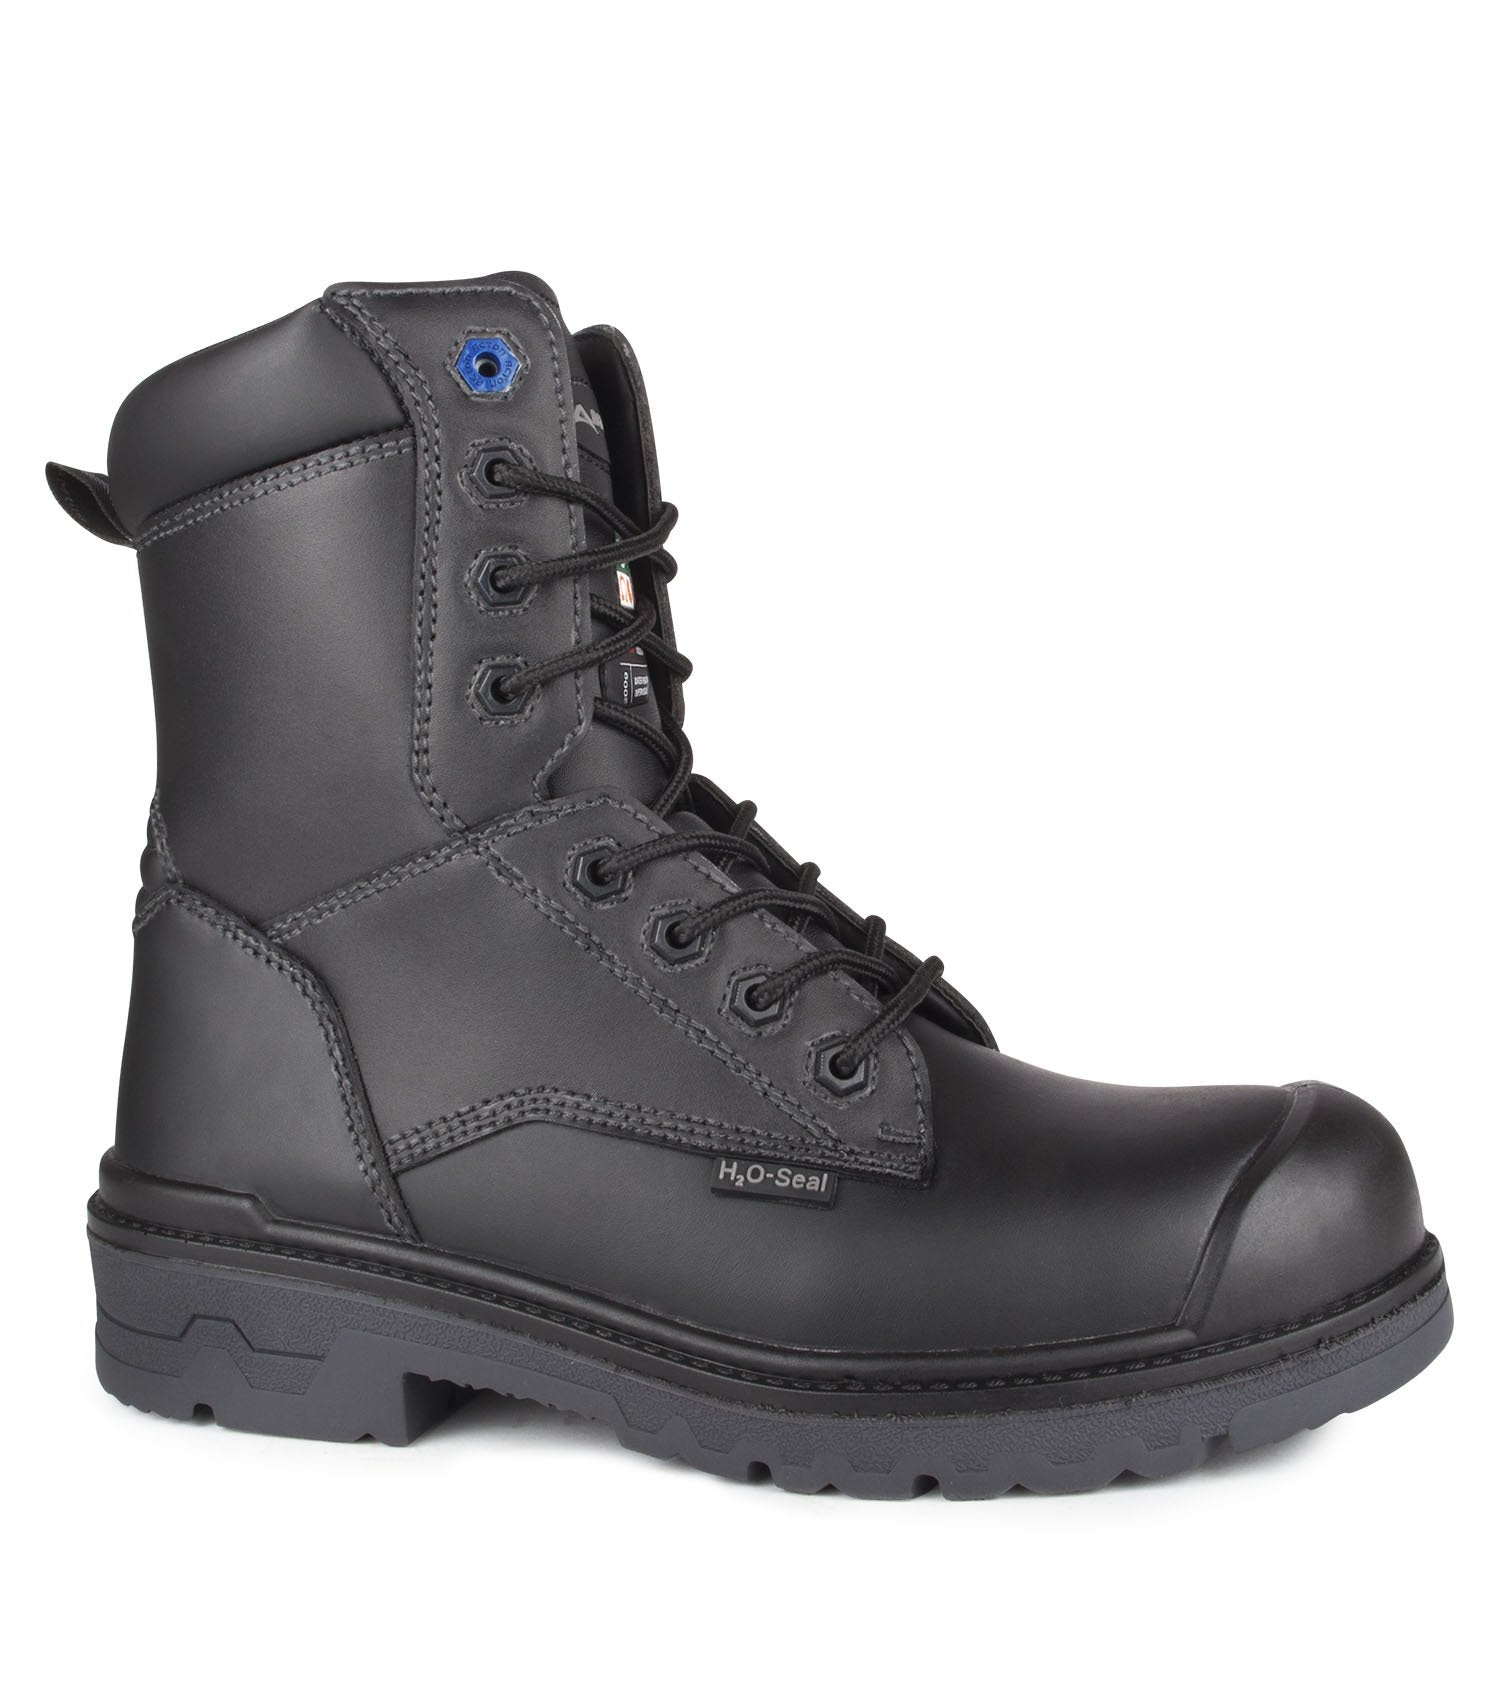 Acton Progum 8" Waterproof Leather Work Boots | Black | Size 7 to Size 17 Work Boots - Cleanflow